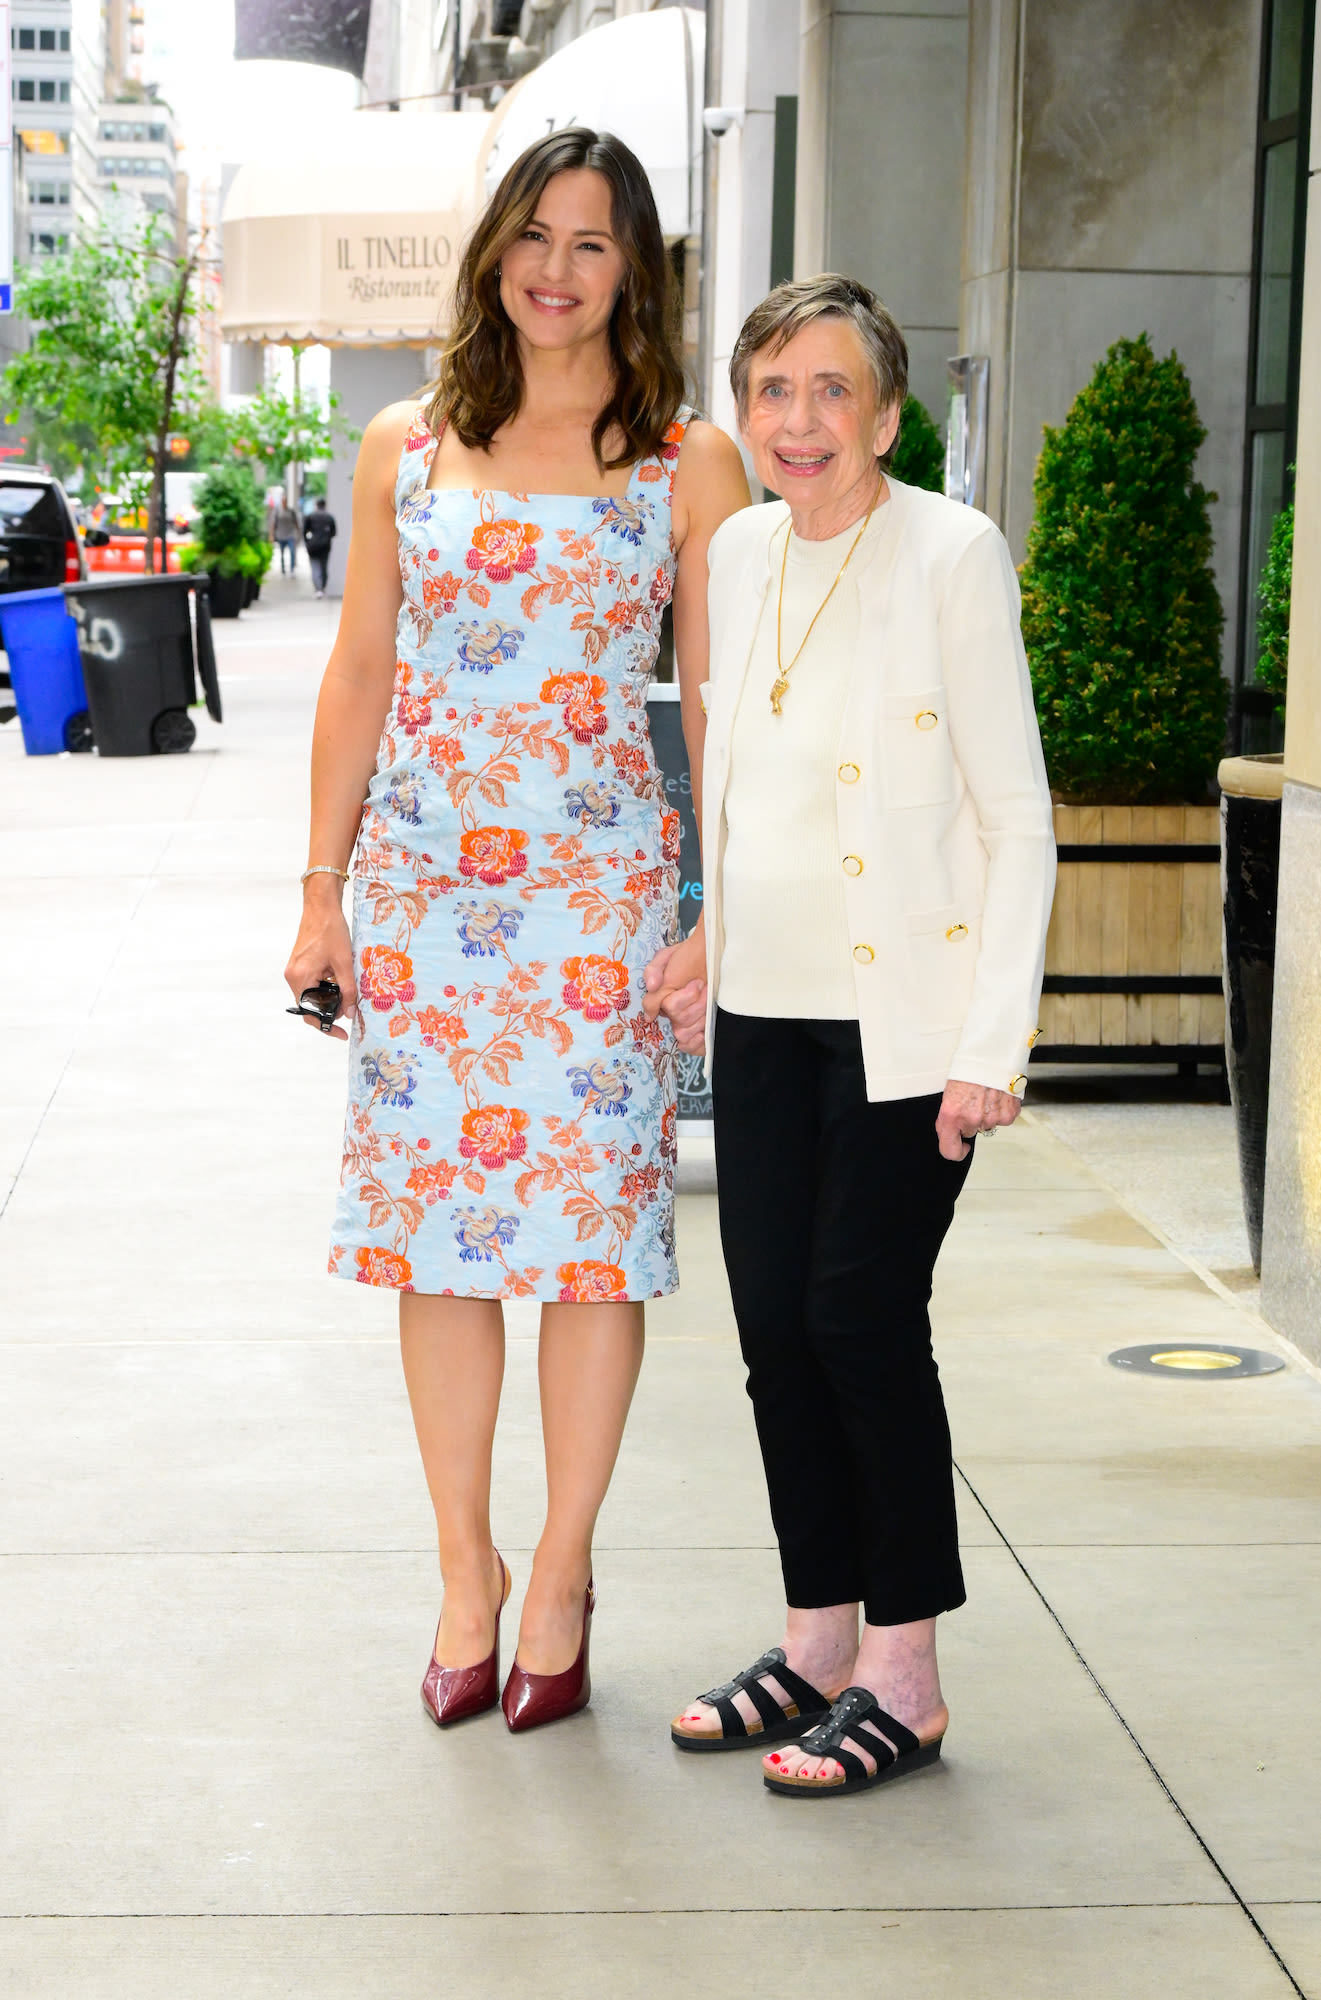 Jennifer Garner and Her Mom Pat Bring Hoda Kotb to Tears When Discussing Grief on ‘Today’